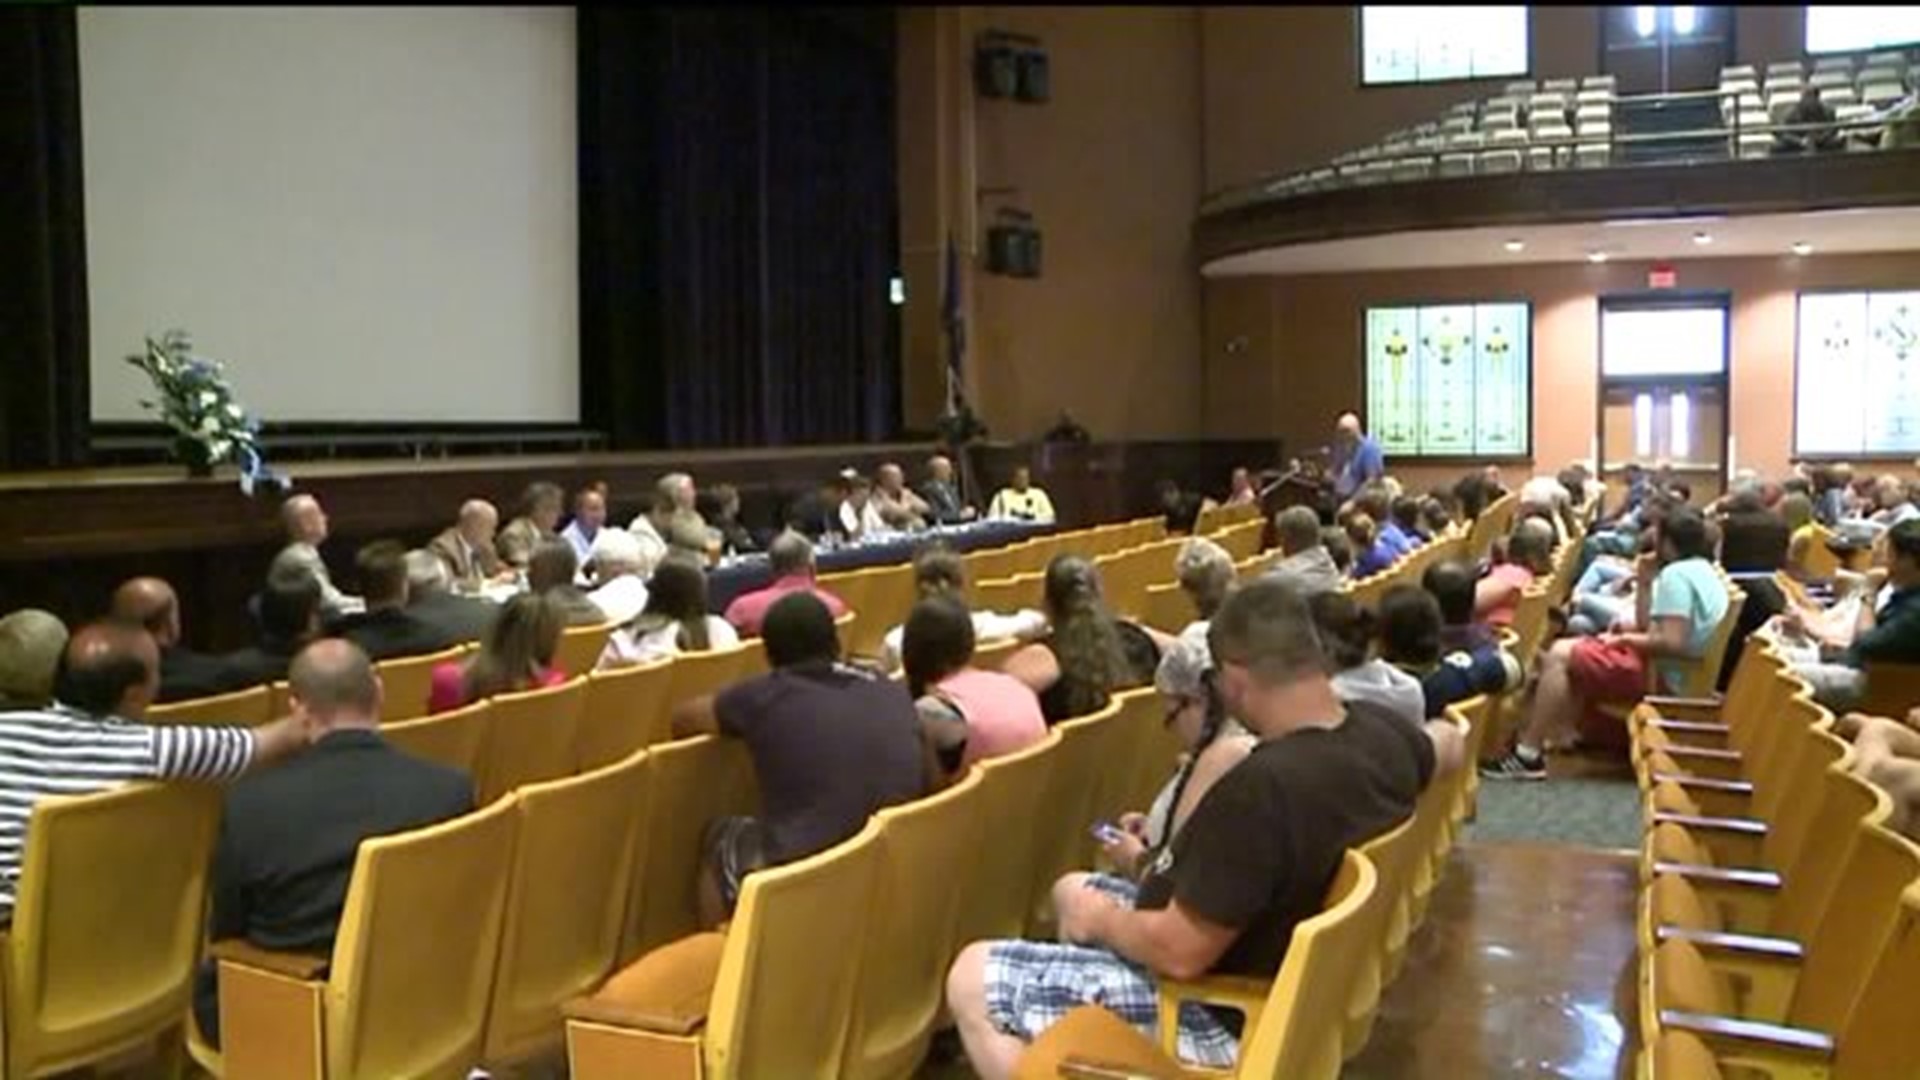 W-B Area School Board Votes To Build New High School, Close Others